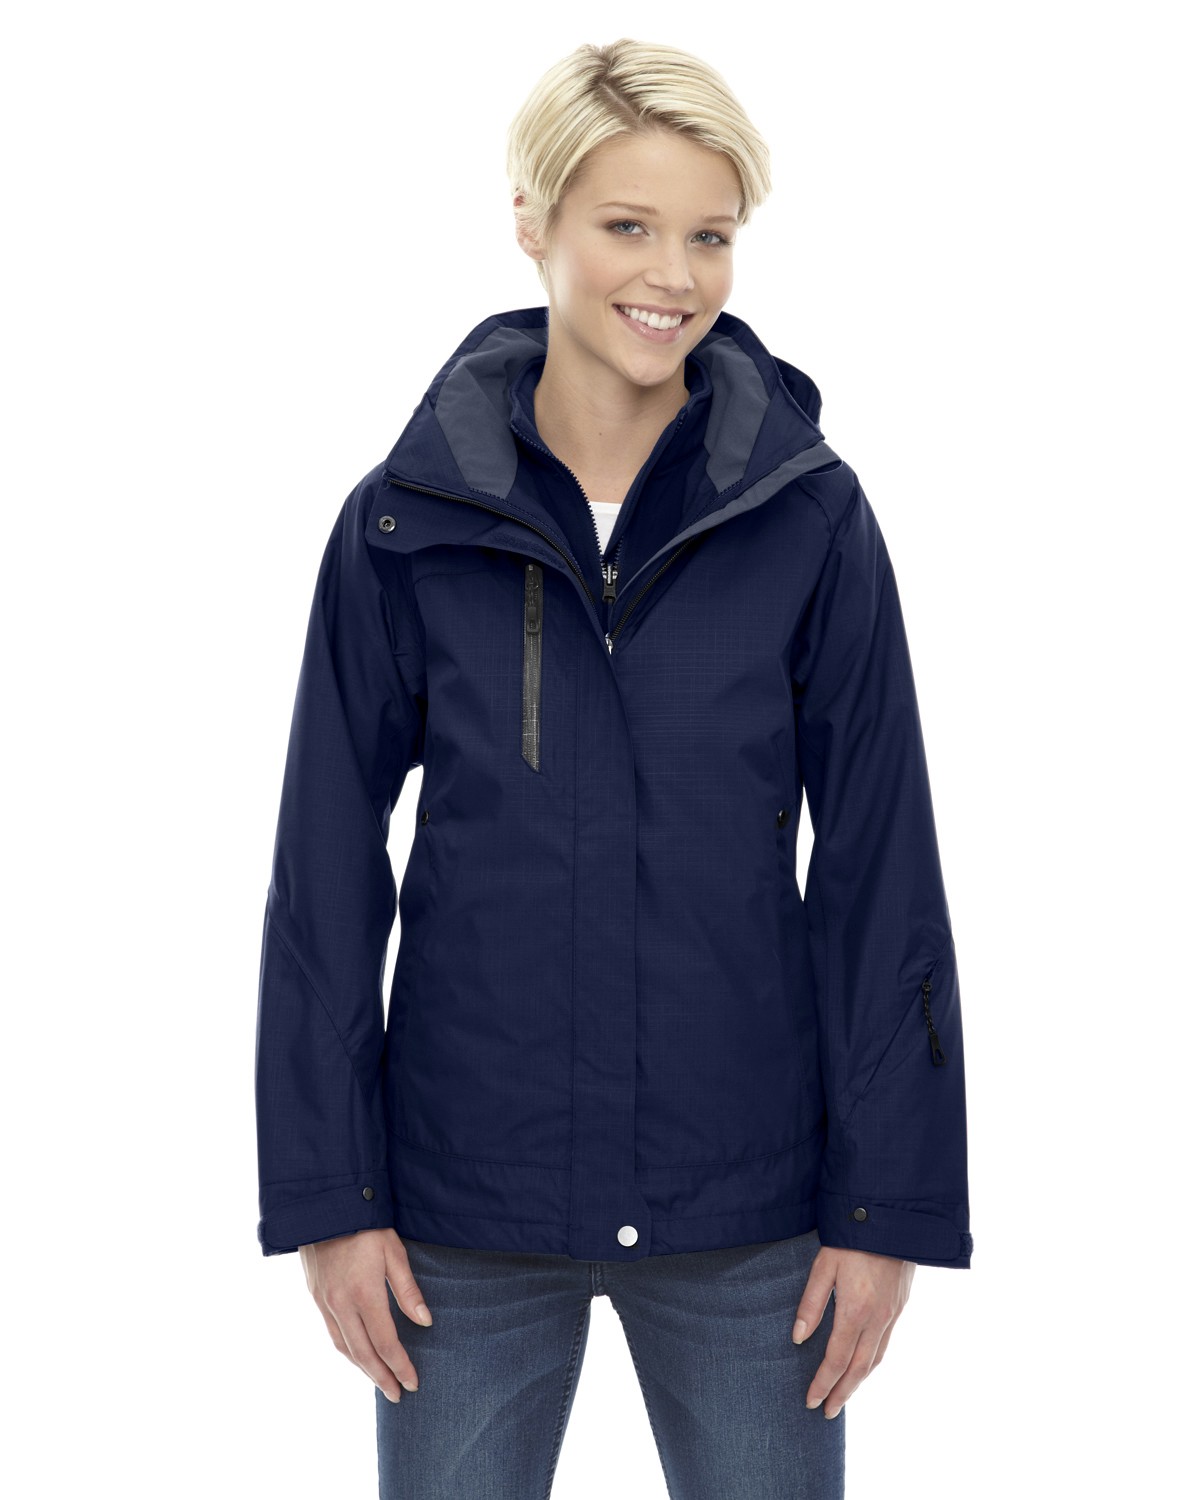 North End 78178 Ladies' Caprice 3-In-1 Jacket With Soft Shell Liner